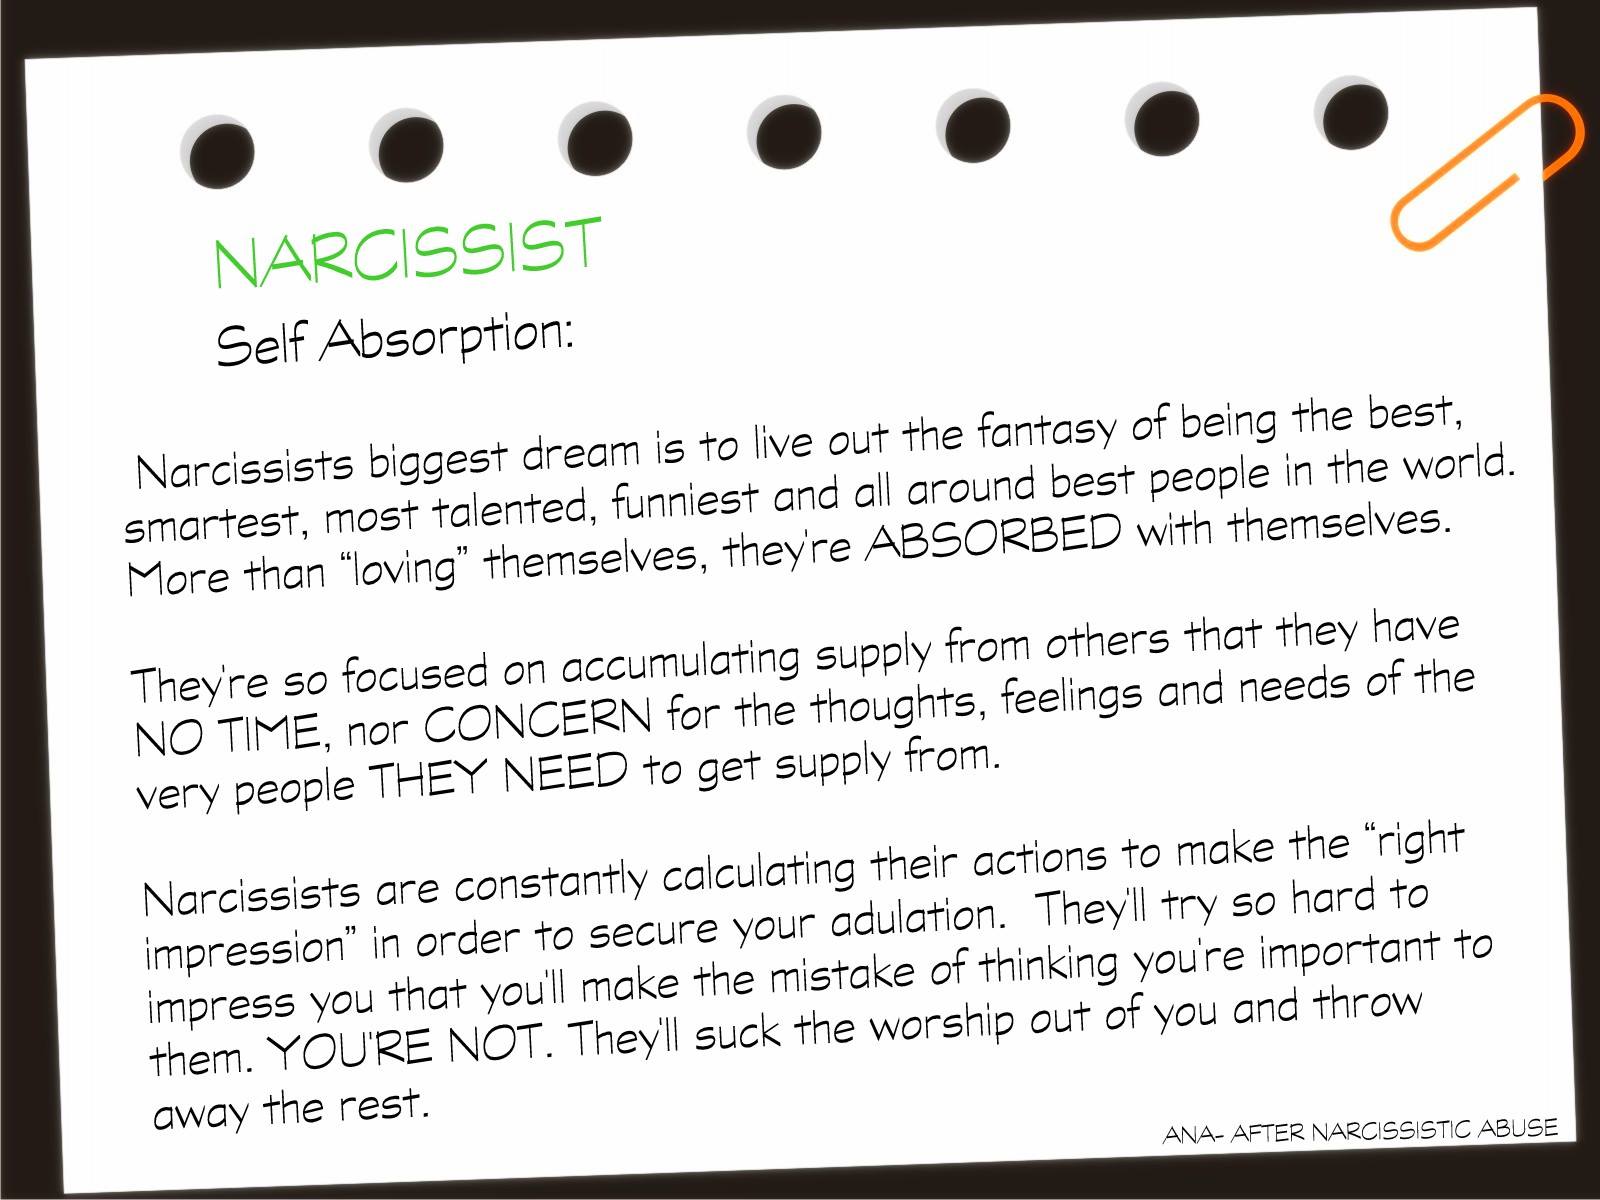 What is a narcissistic person?